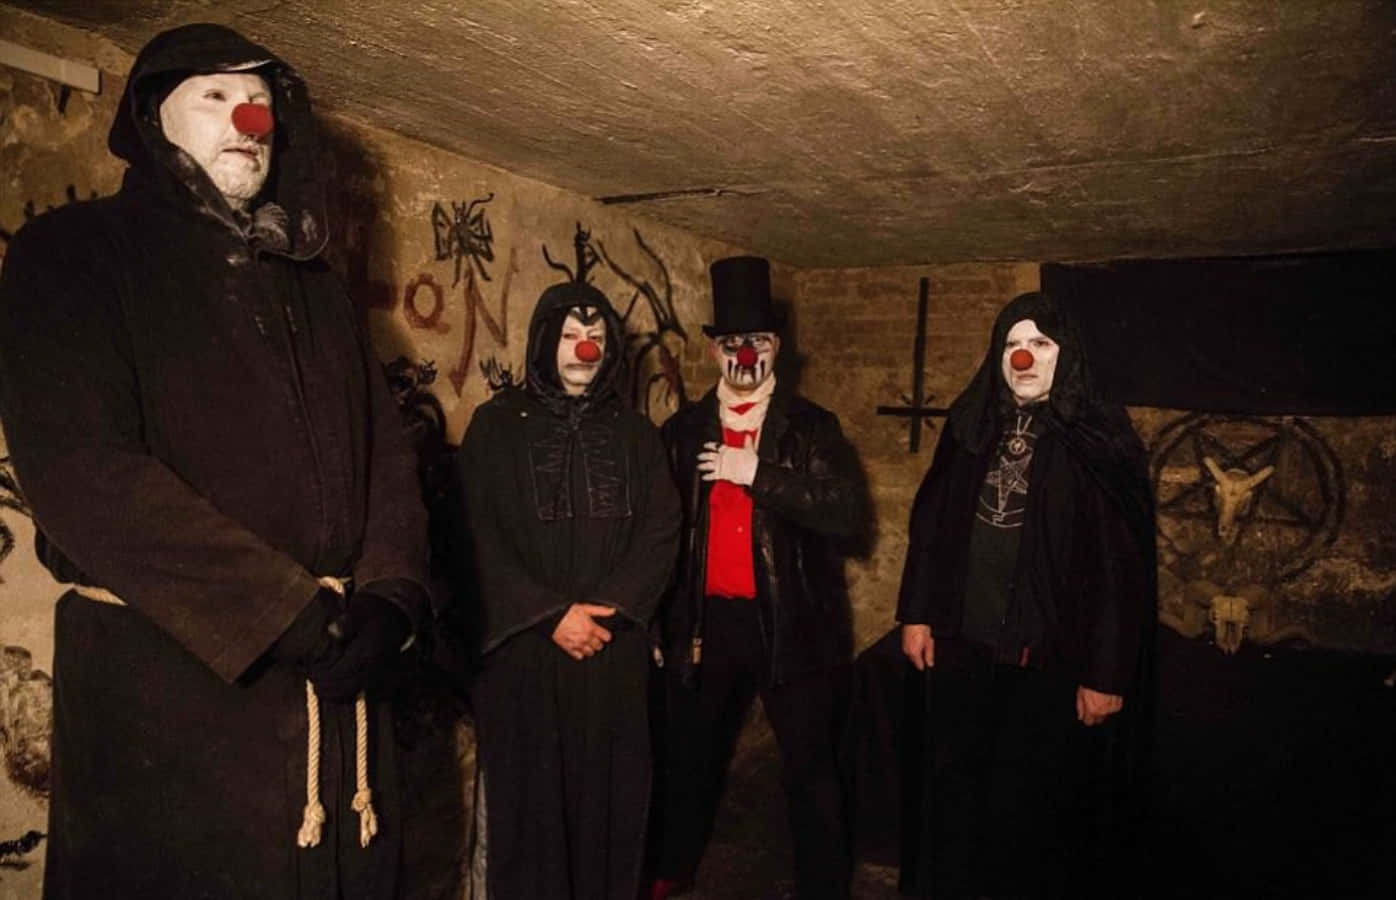 A Group Of Clowns Standing In A Dark Room